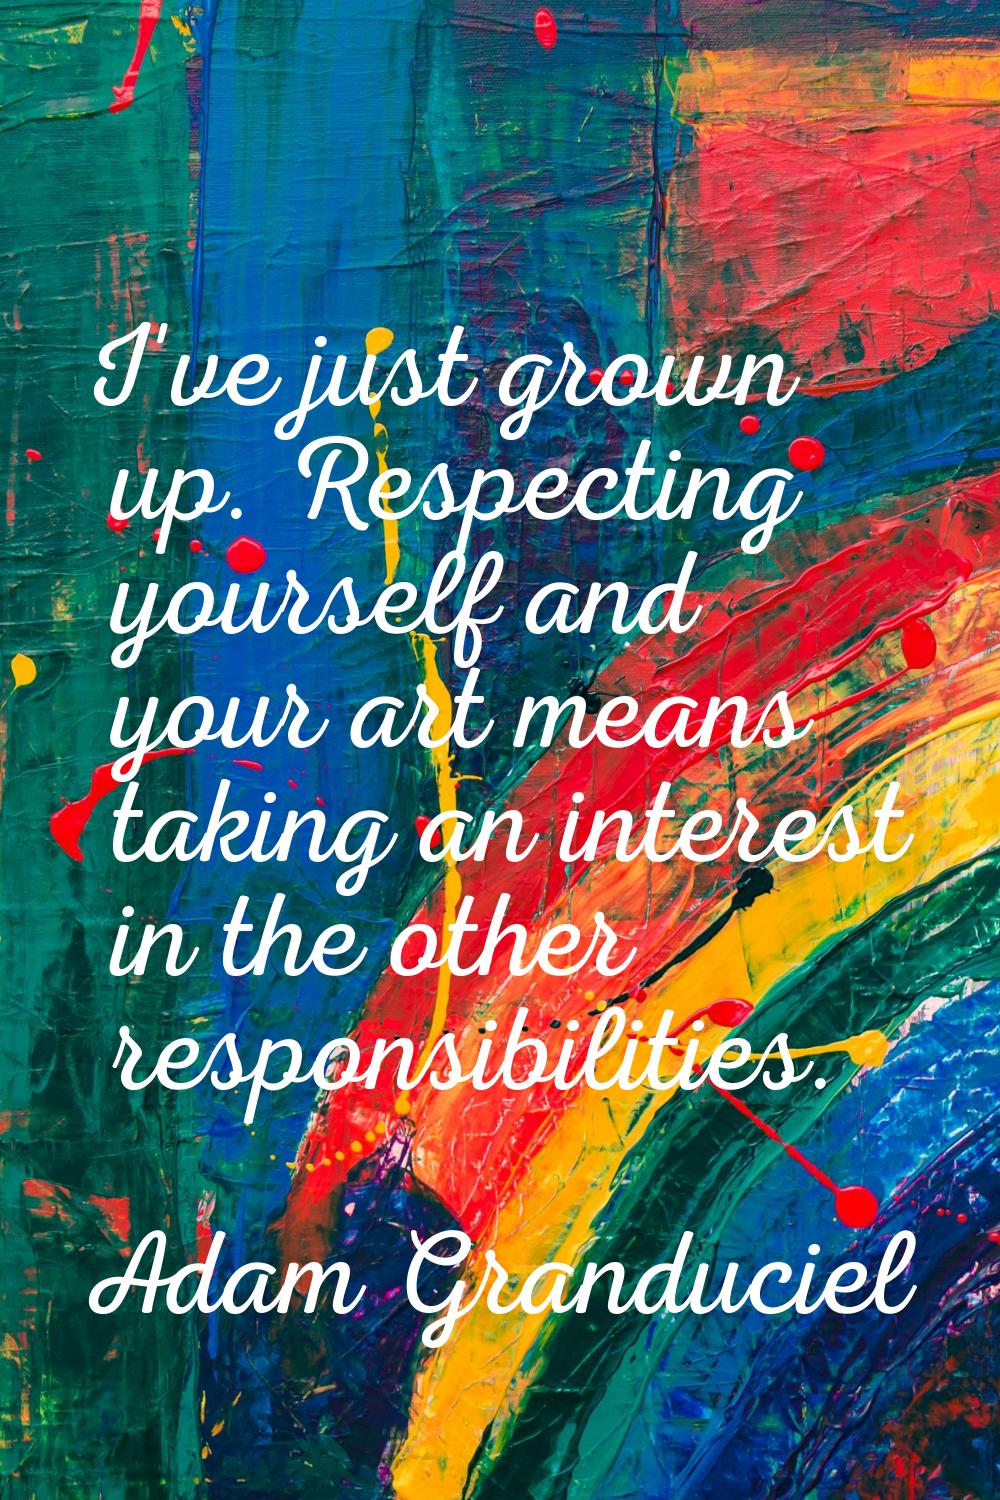 I've just grown up. Respecting yourself and your art means taking an interest in the other responsi